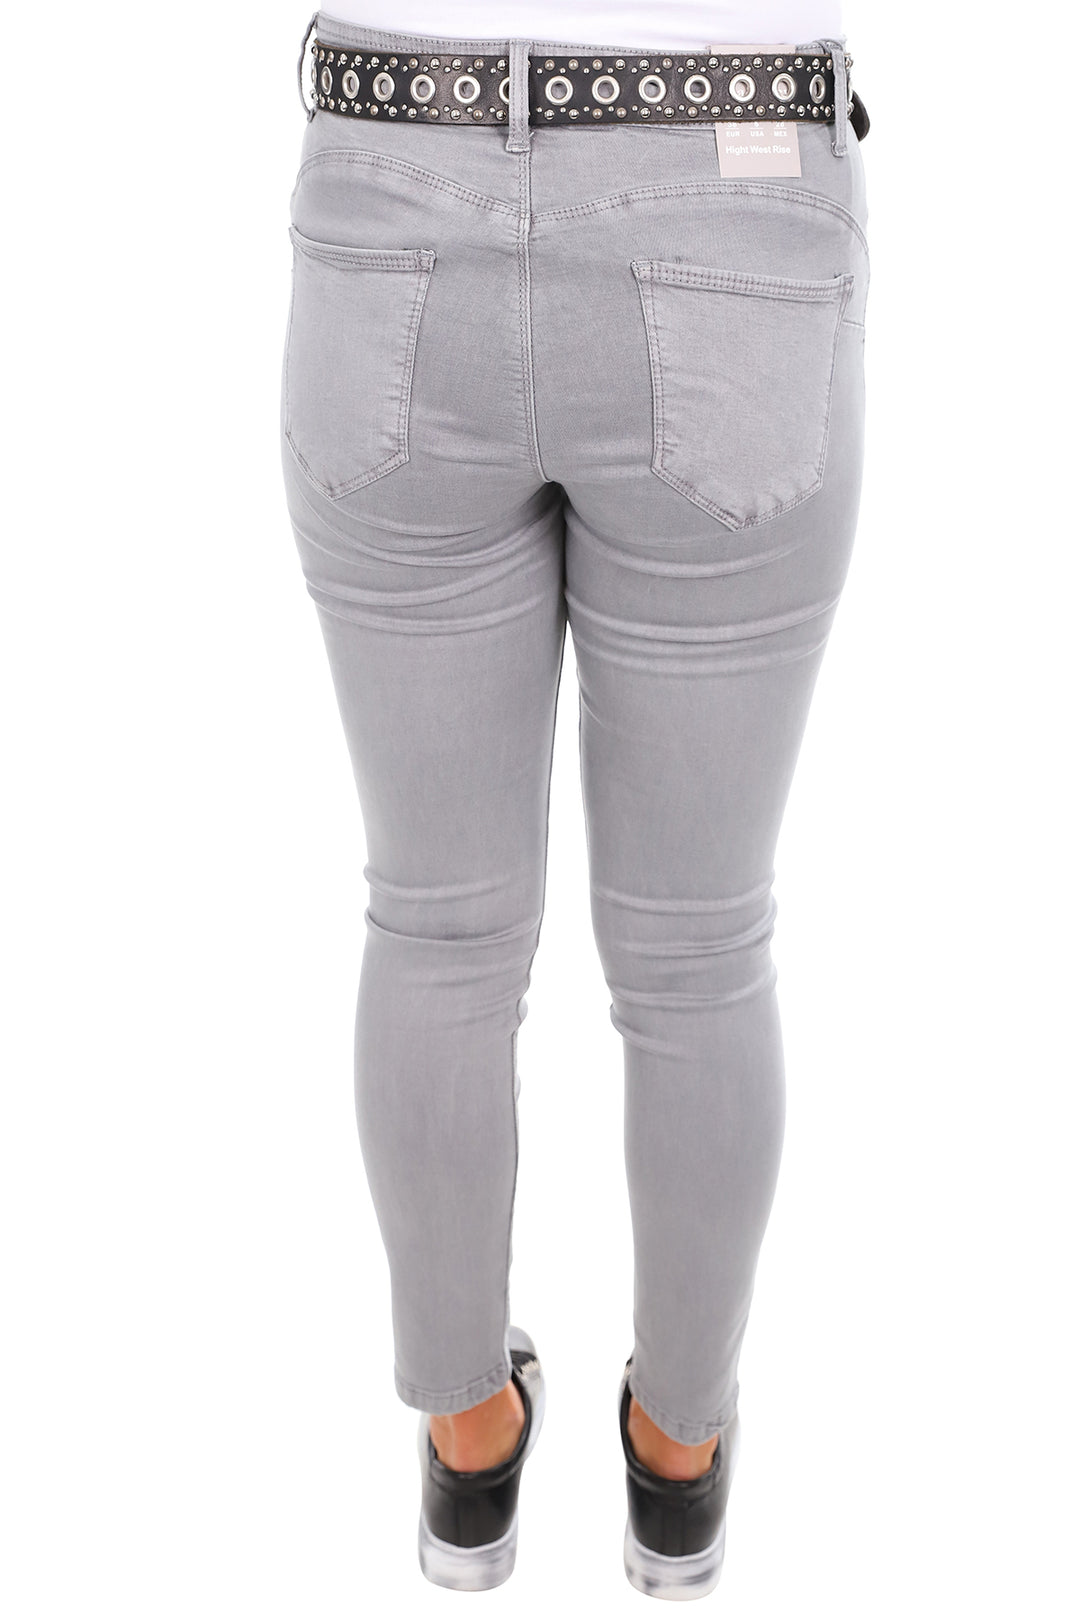 Ana and Lucy high rise jeans in grey, sold and shipped from Pizazz Boutique Nelson Bay women's dresses online Australia back view